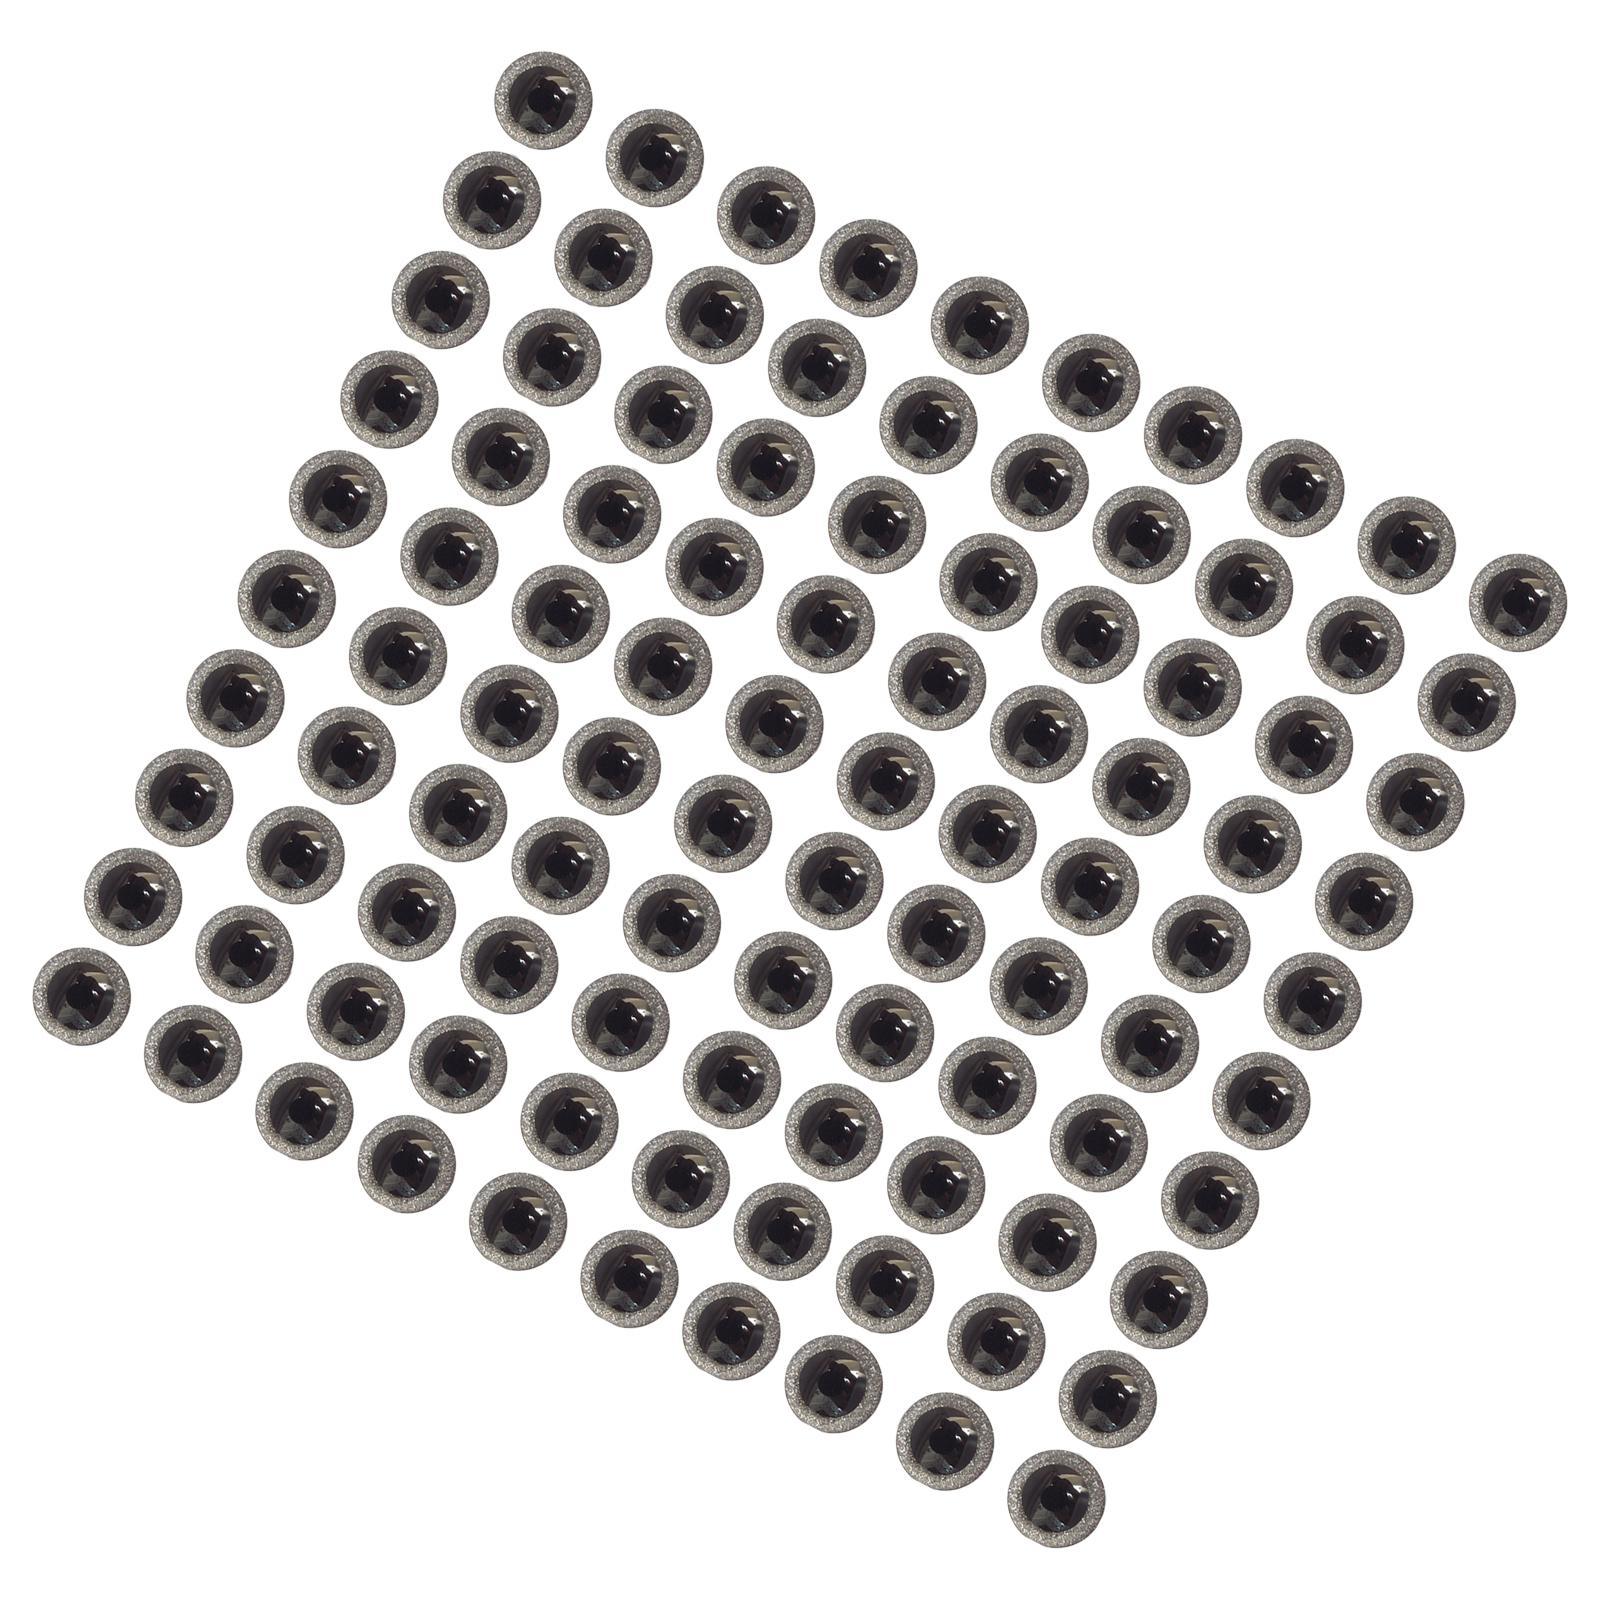 100x  Safety Eyes 3D Glitter Toy for Stuffed Doll Plush Toy Making